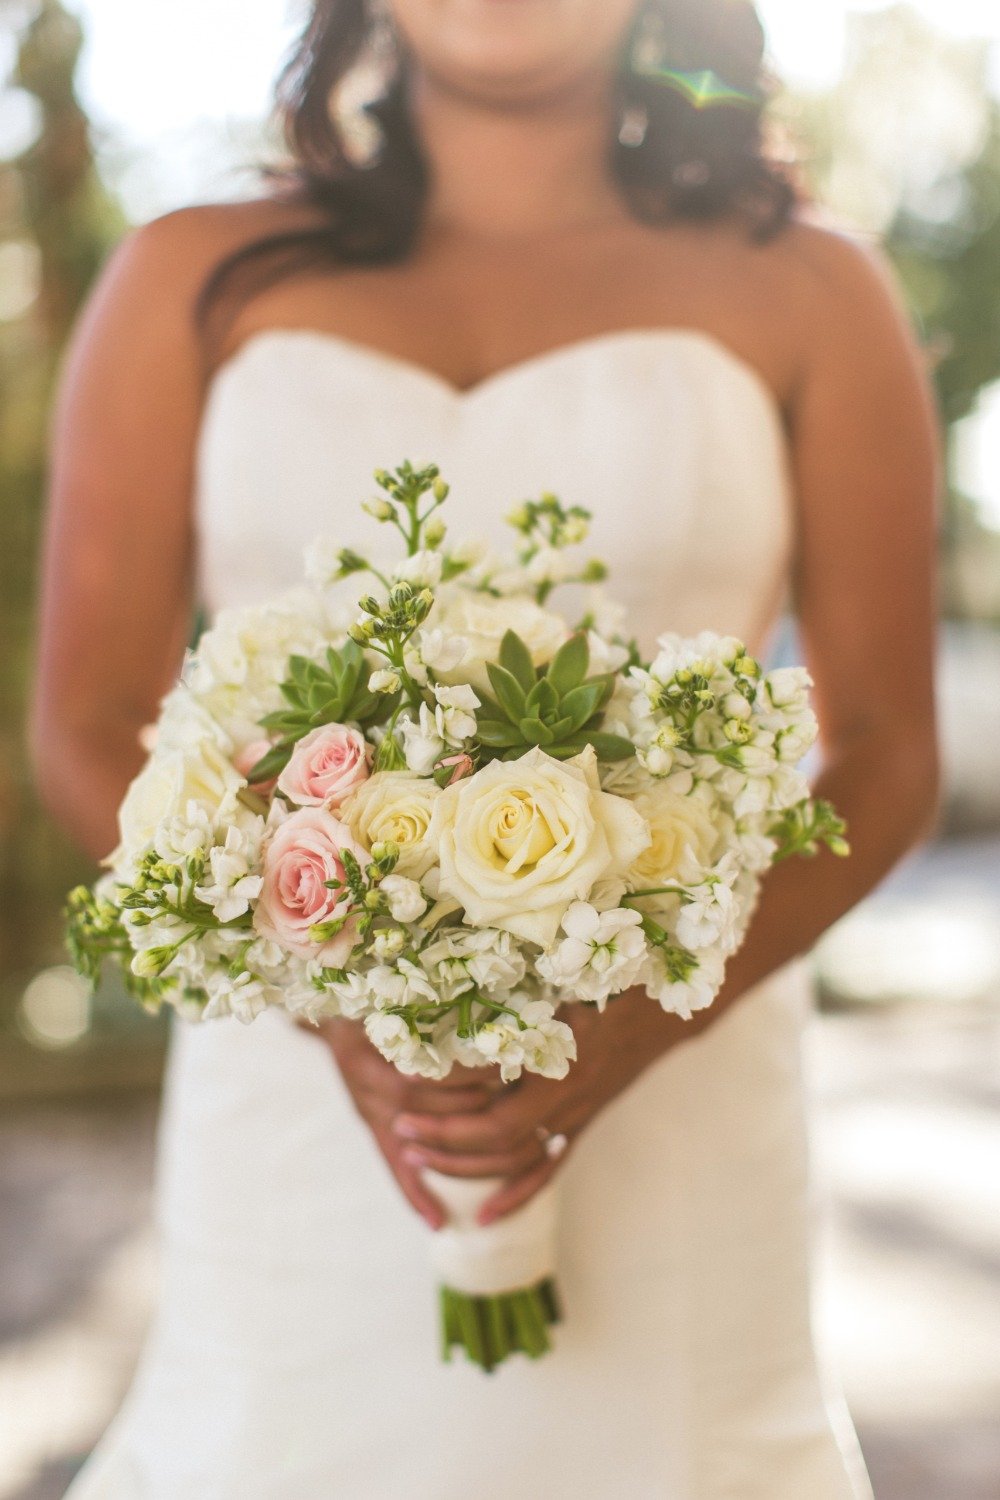 Simple and chic wedding bouquet